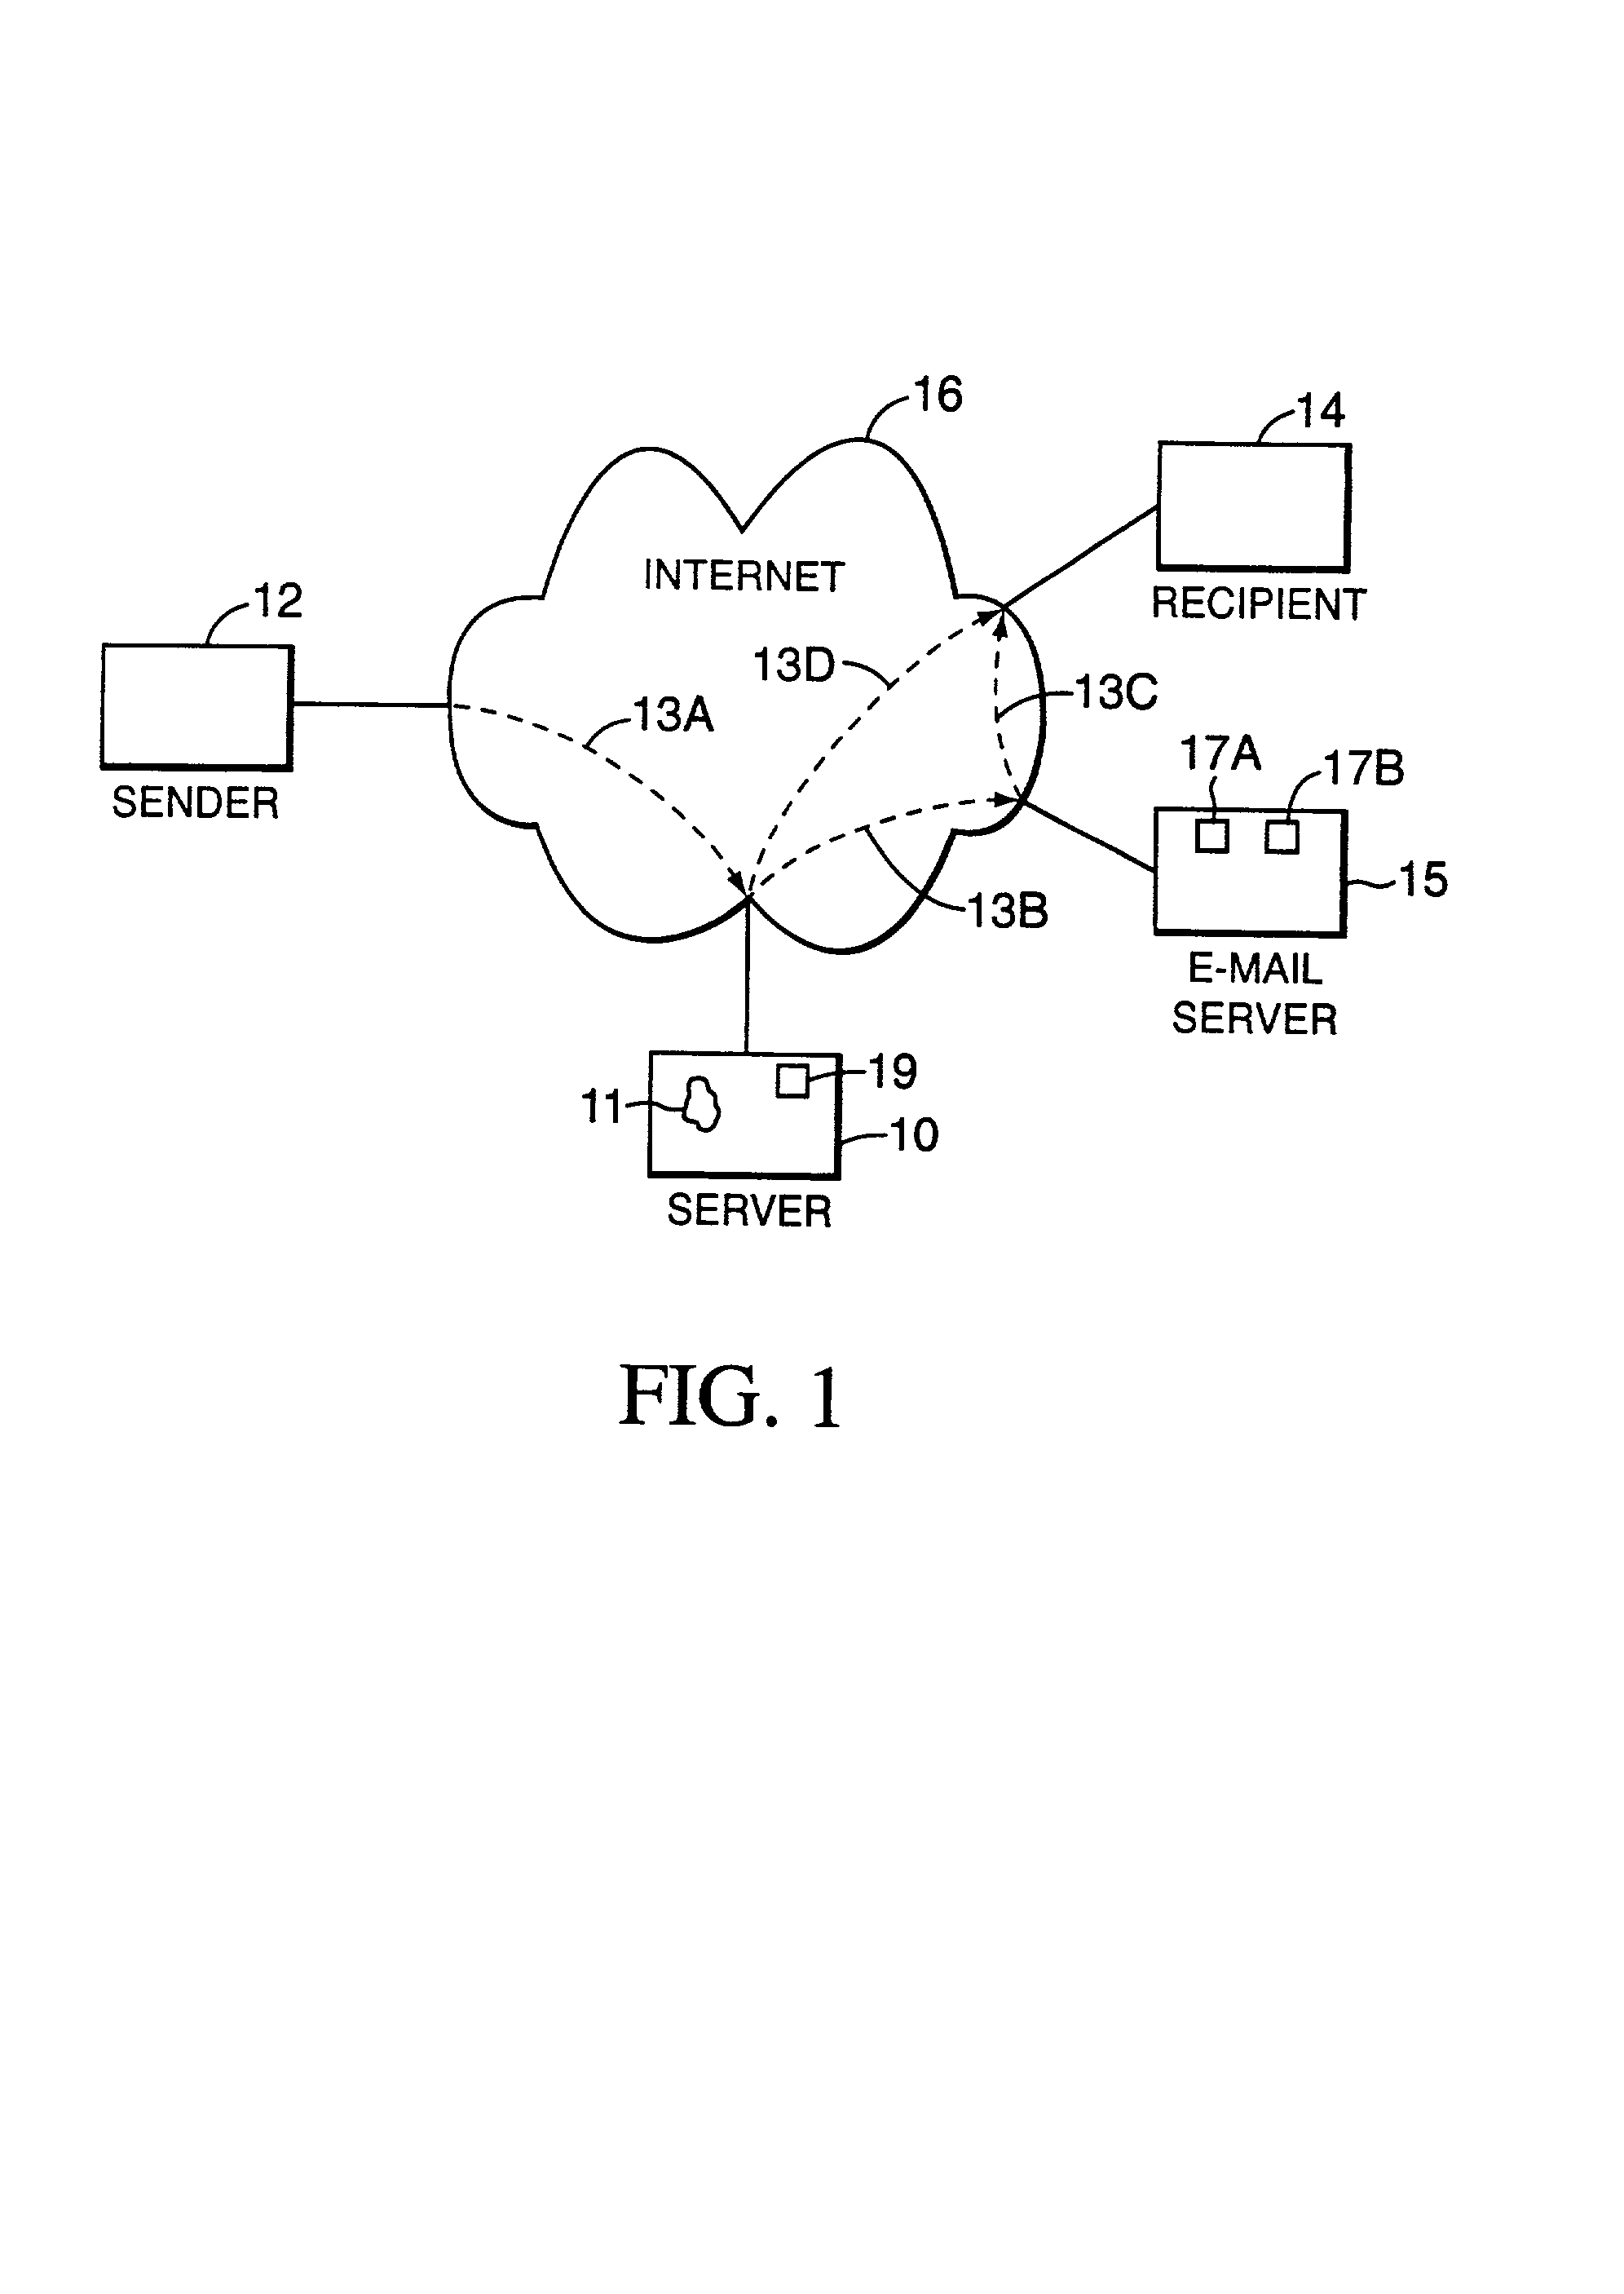 Method and apparatus for the production, delivery, and receipt of audiovisual e-mail